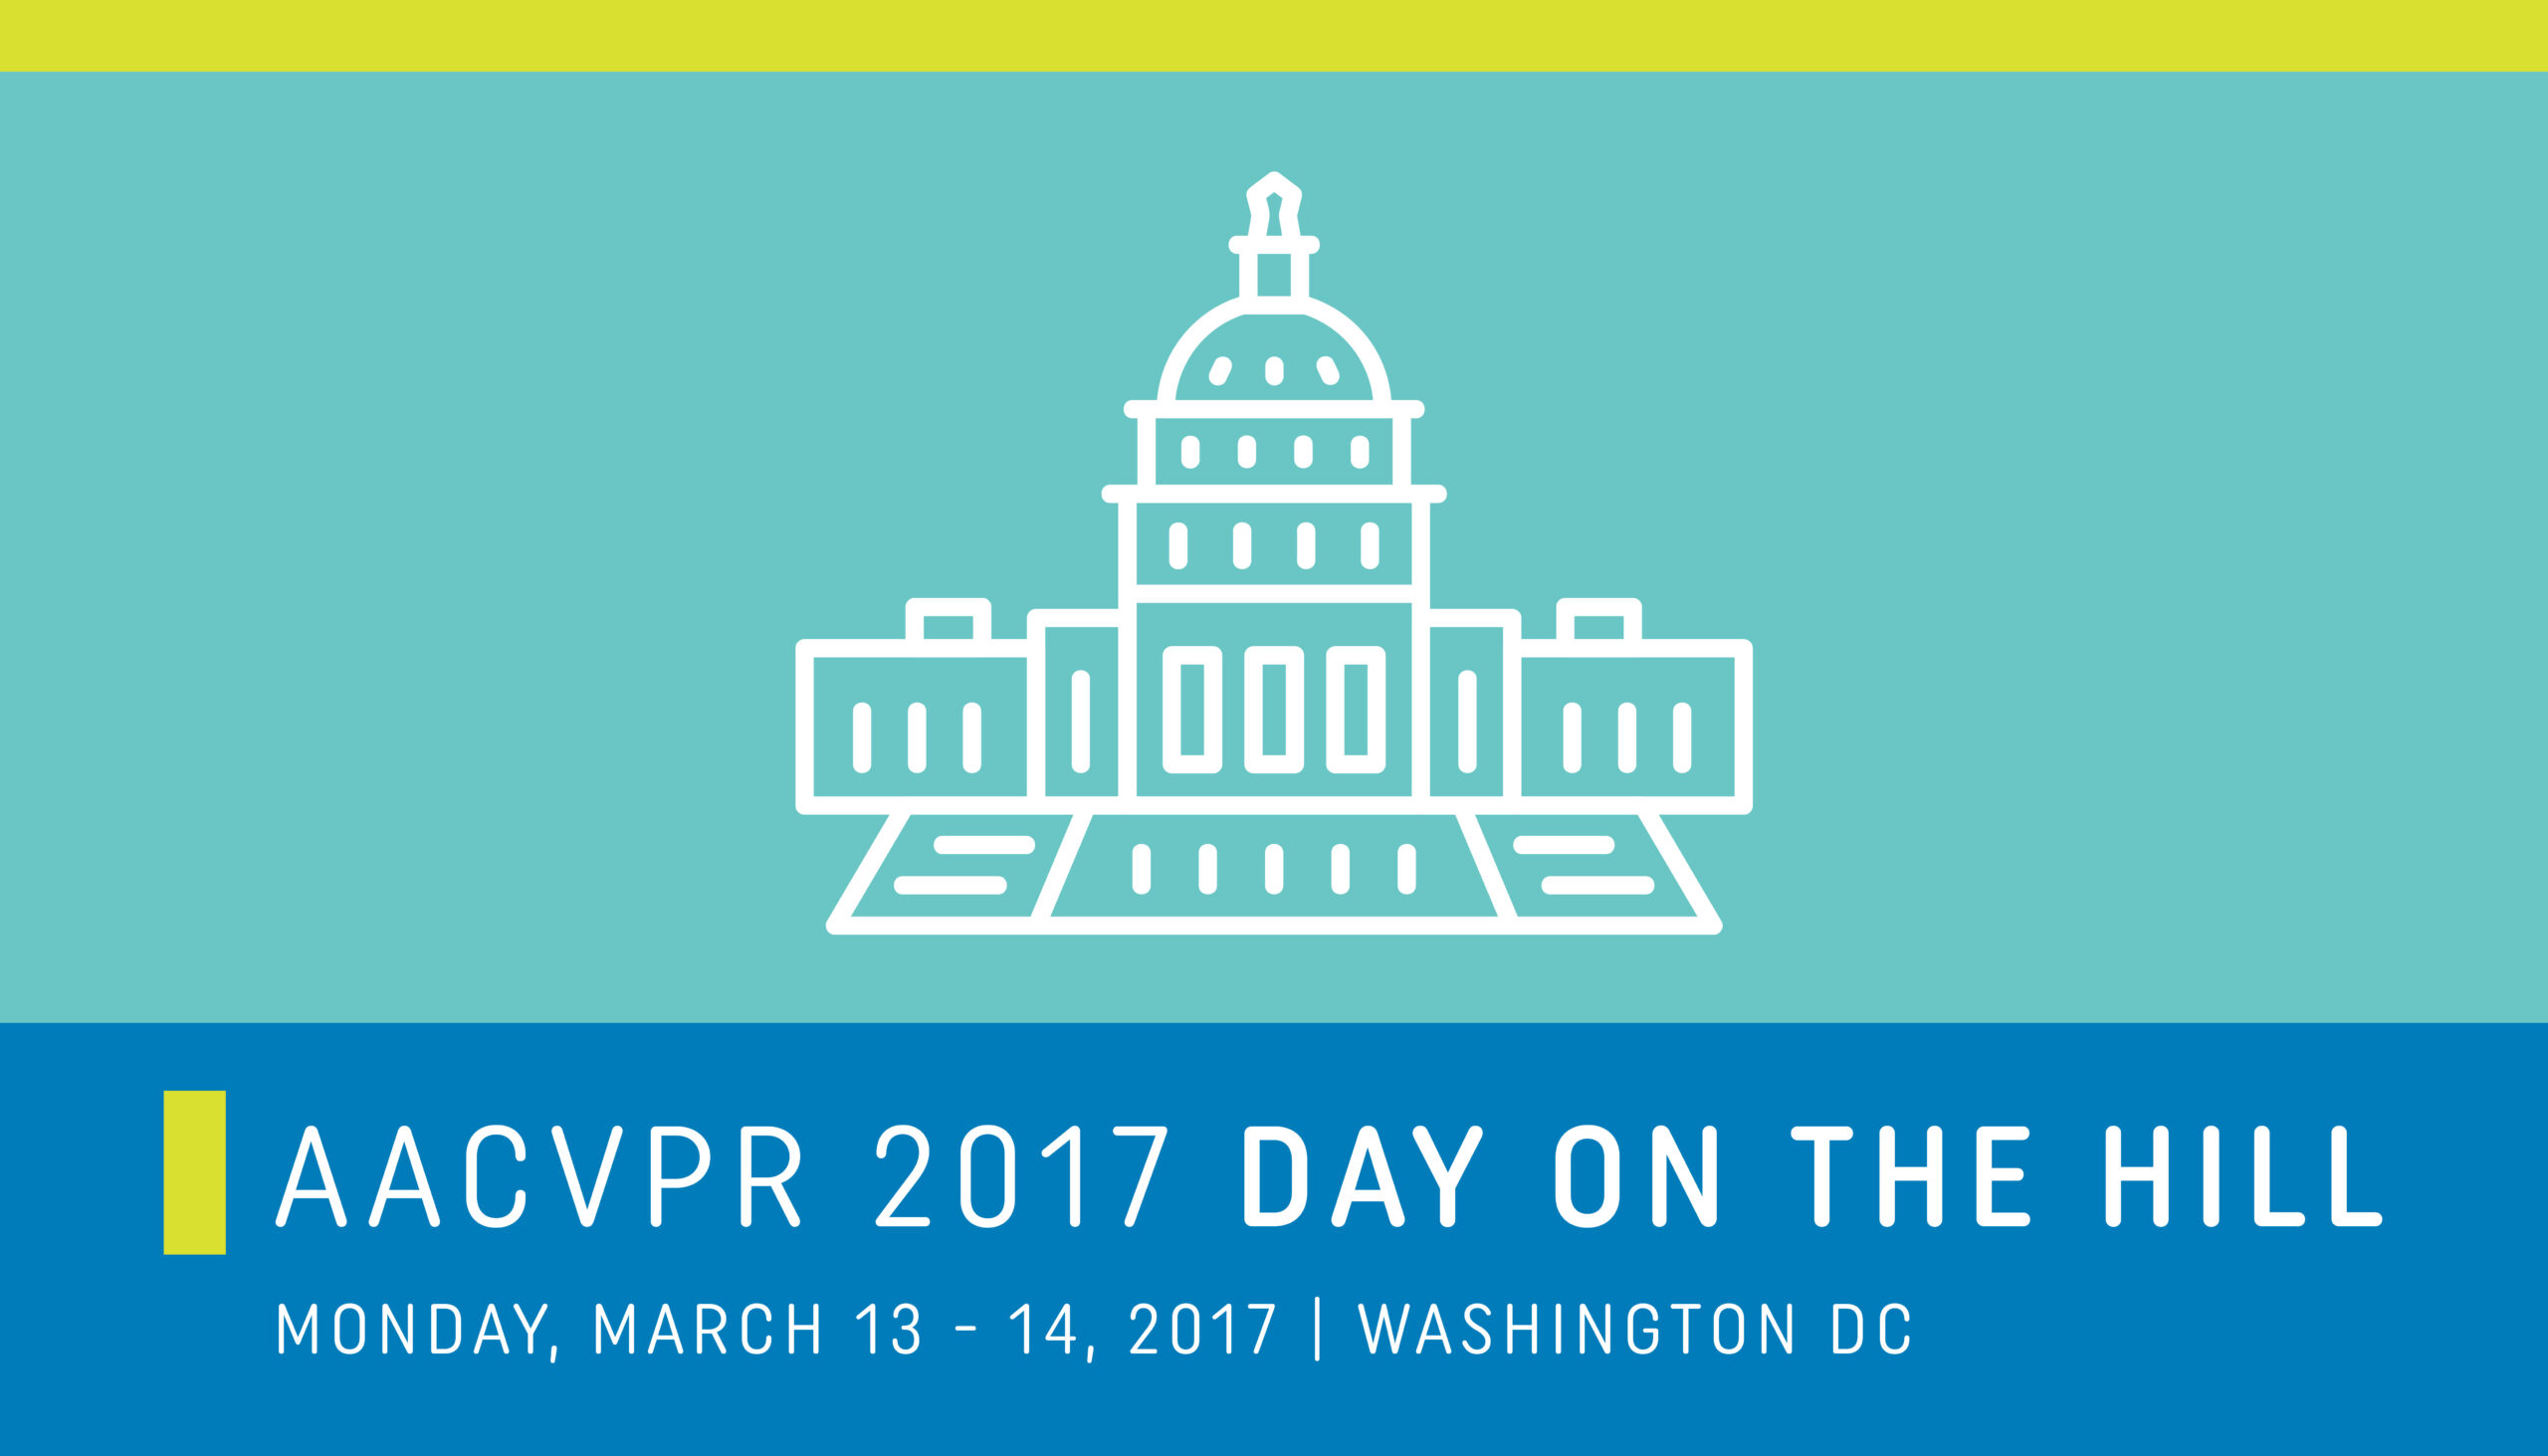 What to do if you can’t attend AACVPR’s Day on the Hill 2017